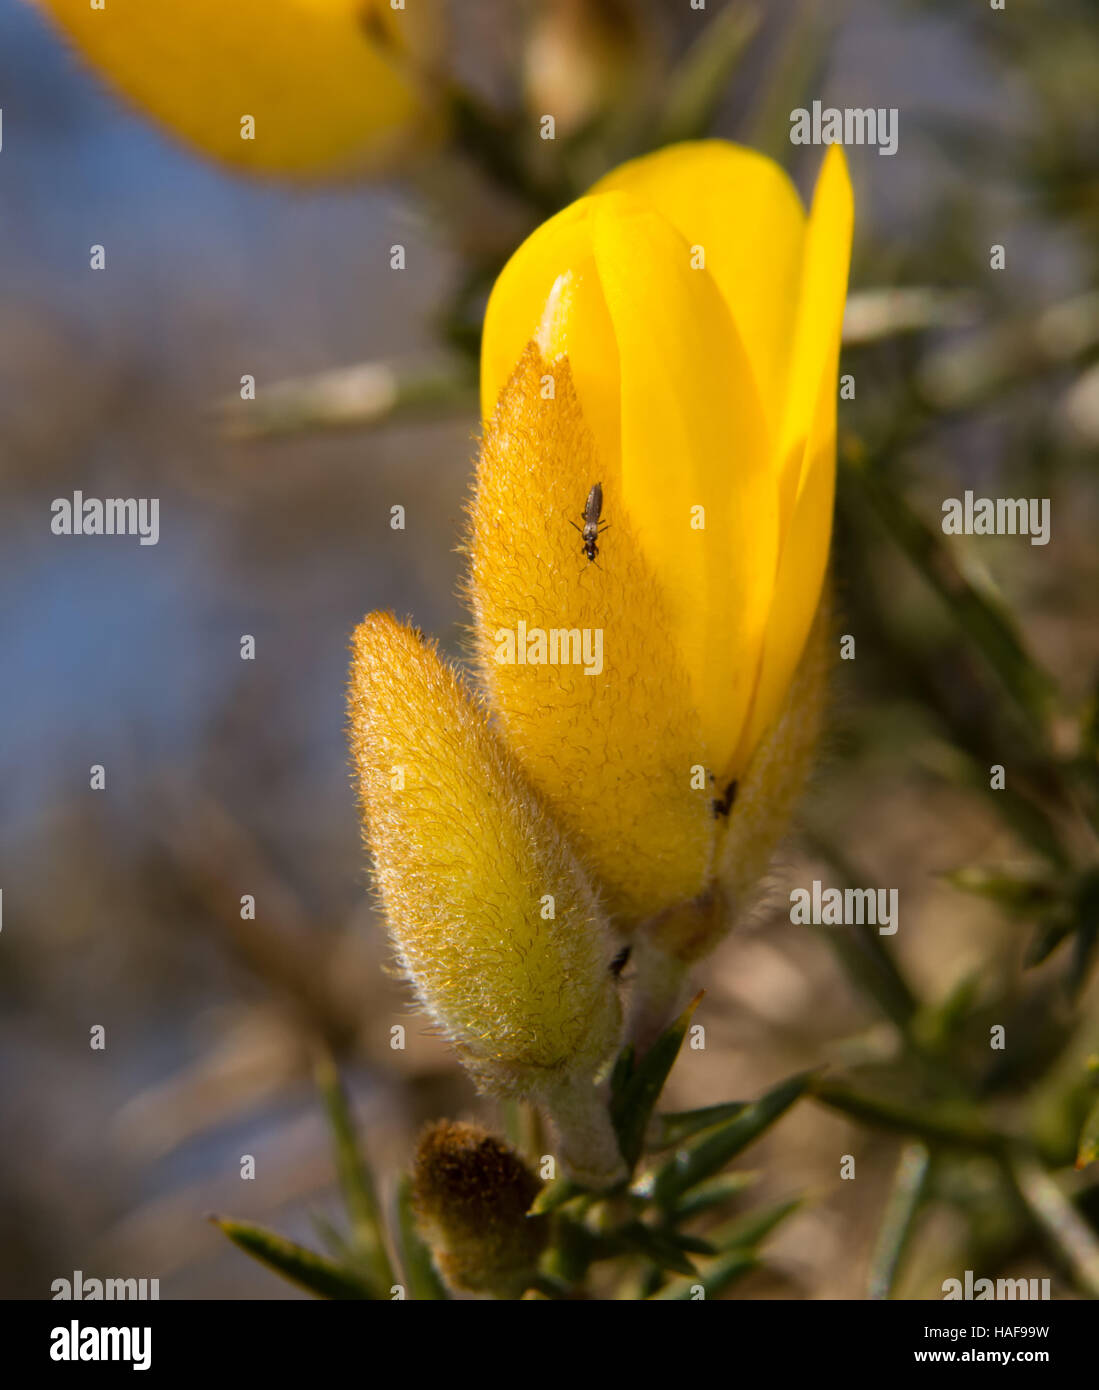 A close-up of a Common Gorse (Ulex europaeus) flower. Stock Photo